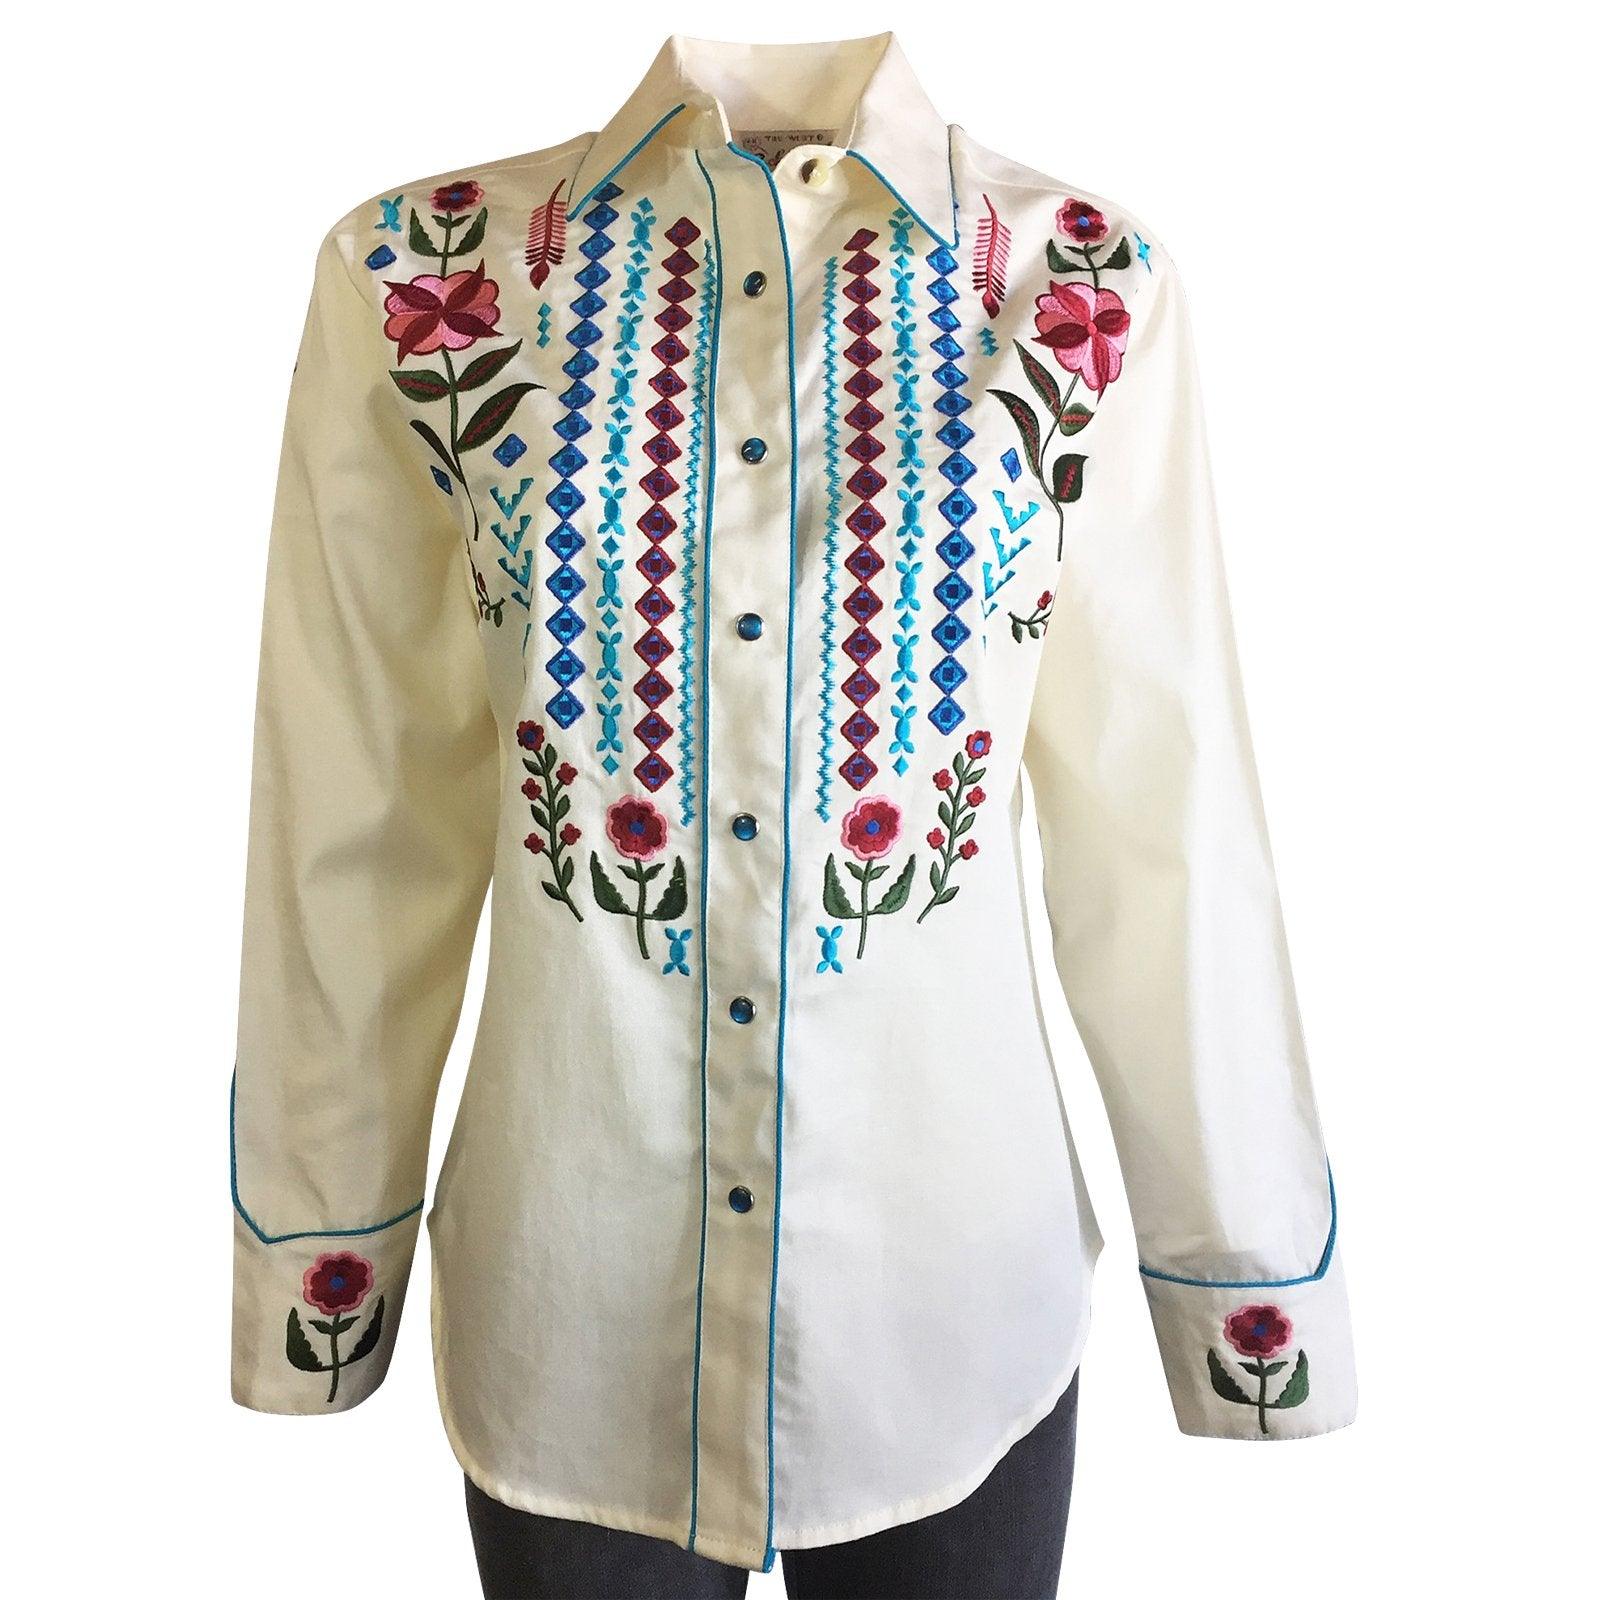 Women's Boho Serape Western Shirt with Cascading Embroidery in Ivory - Flyclothing LLC